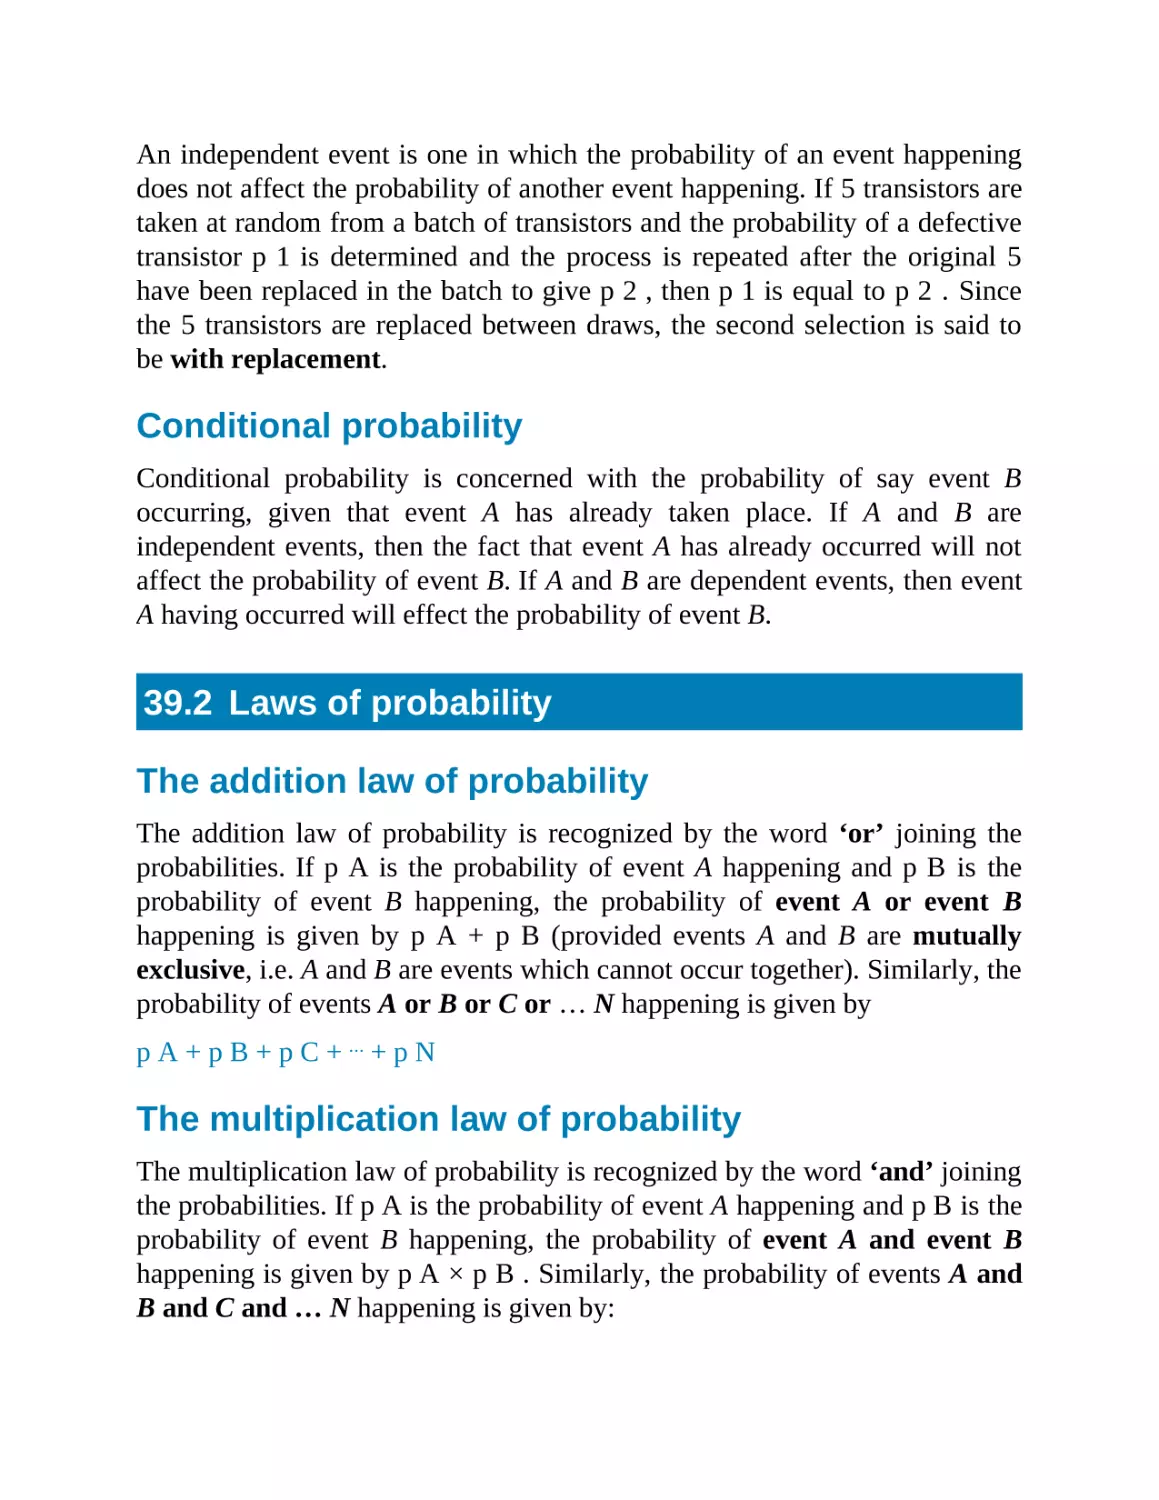 39.2 Laws of probability